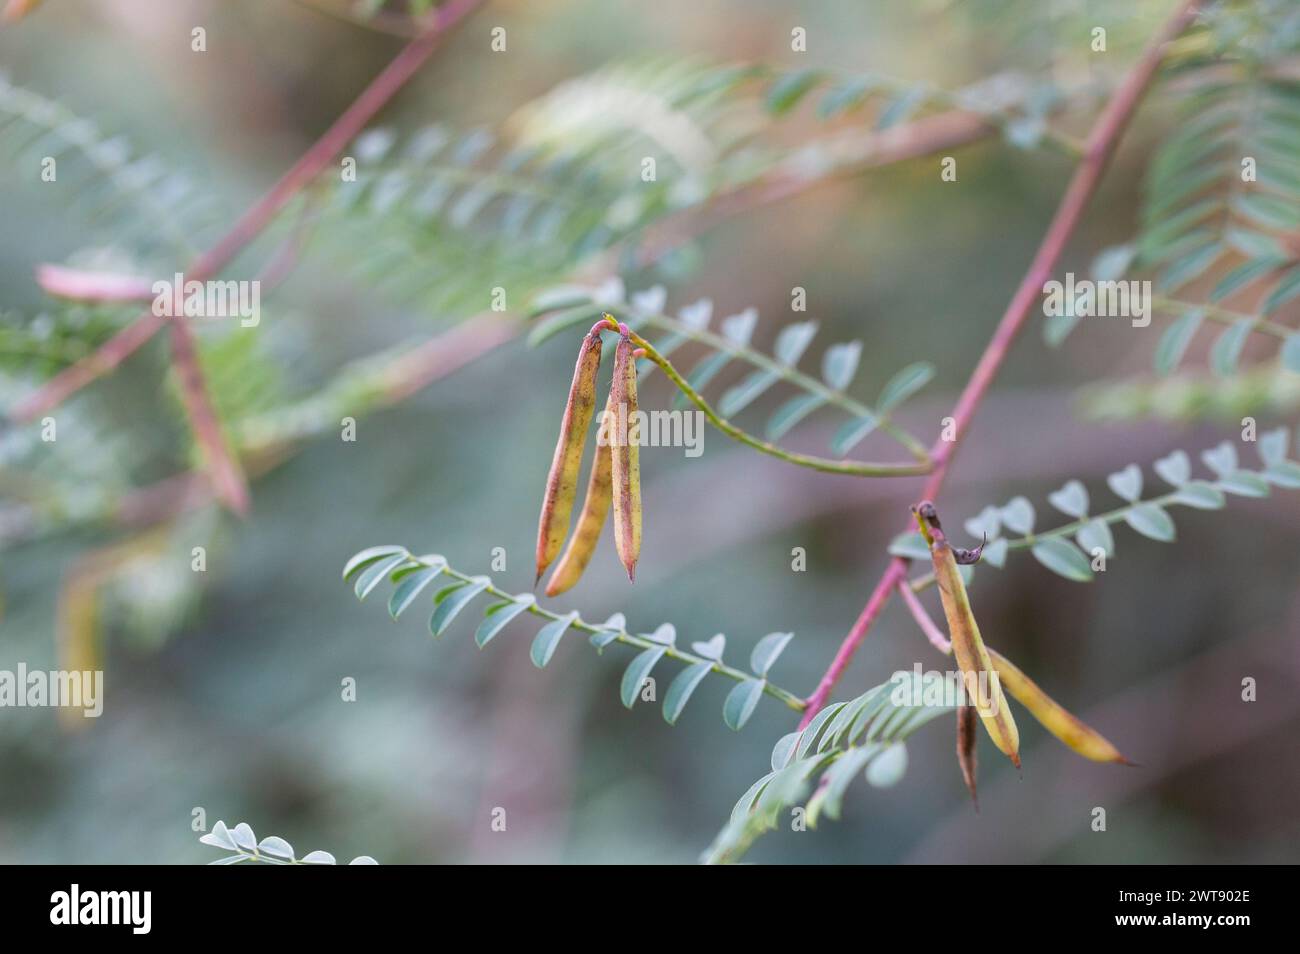 Acacia leaves with a pattern and long green pods with seeds on a blurred background of a garden lawn. Fresh foliage and branches in the park. Summer g Stock Photo